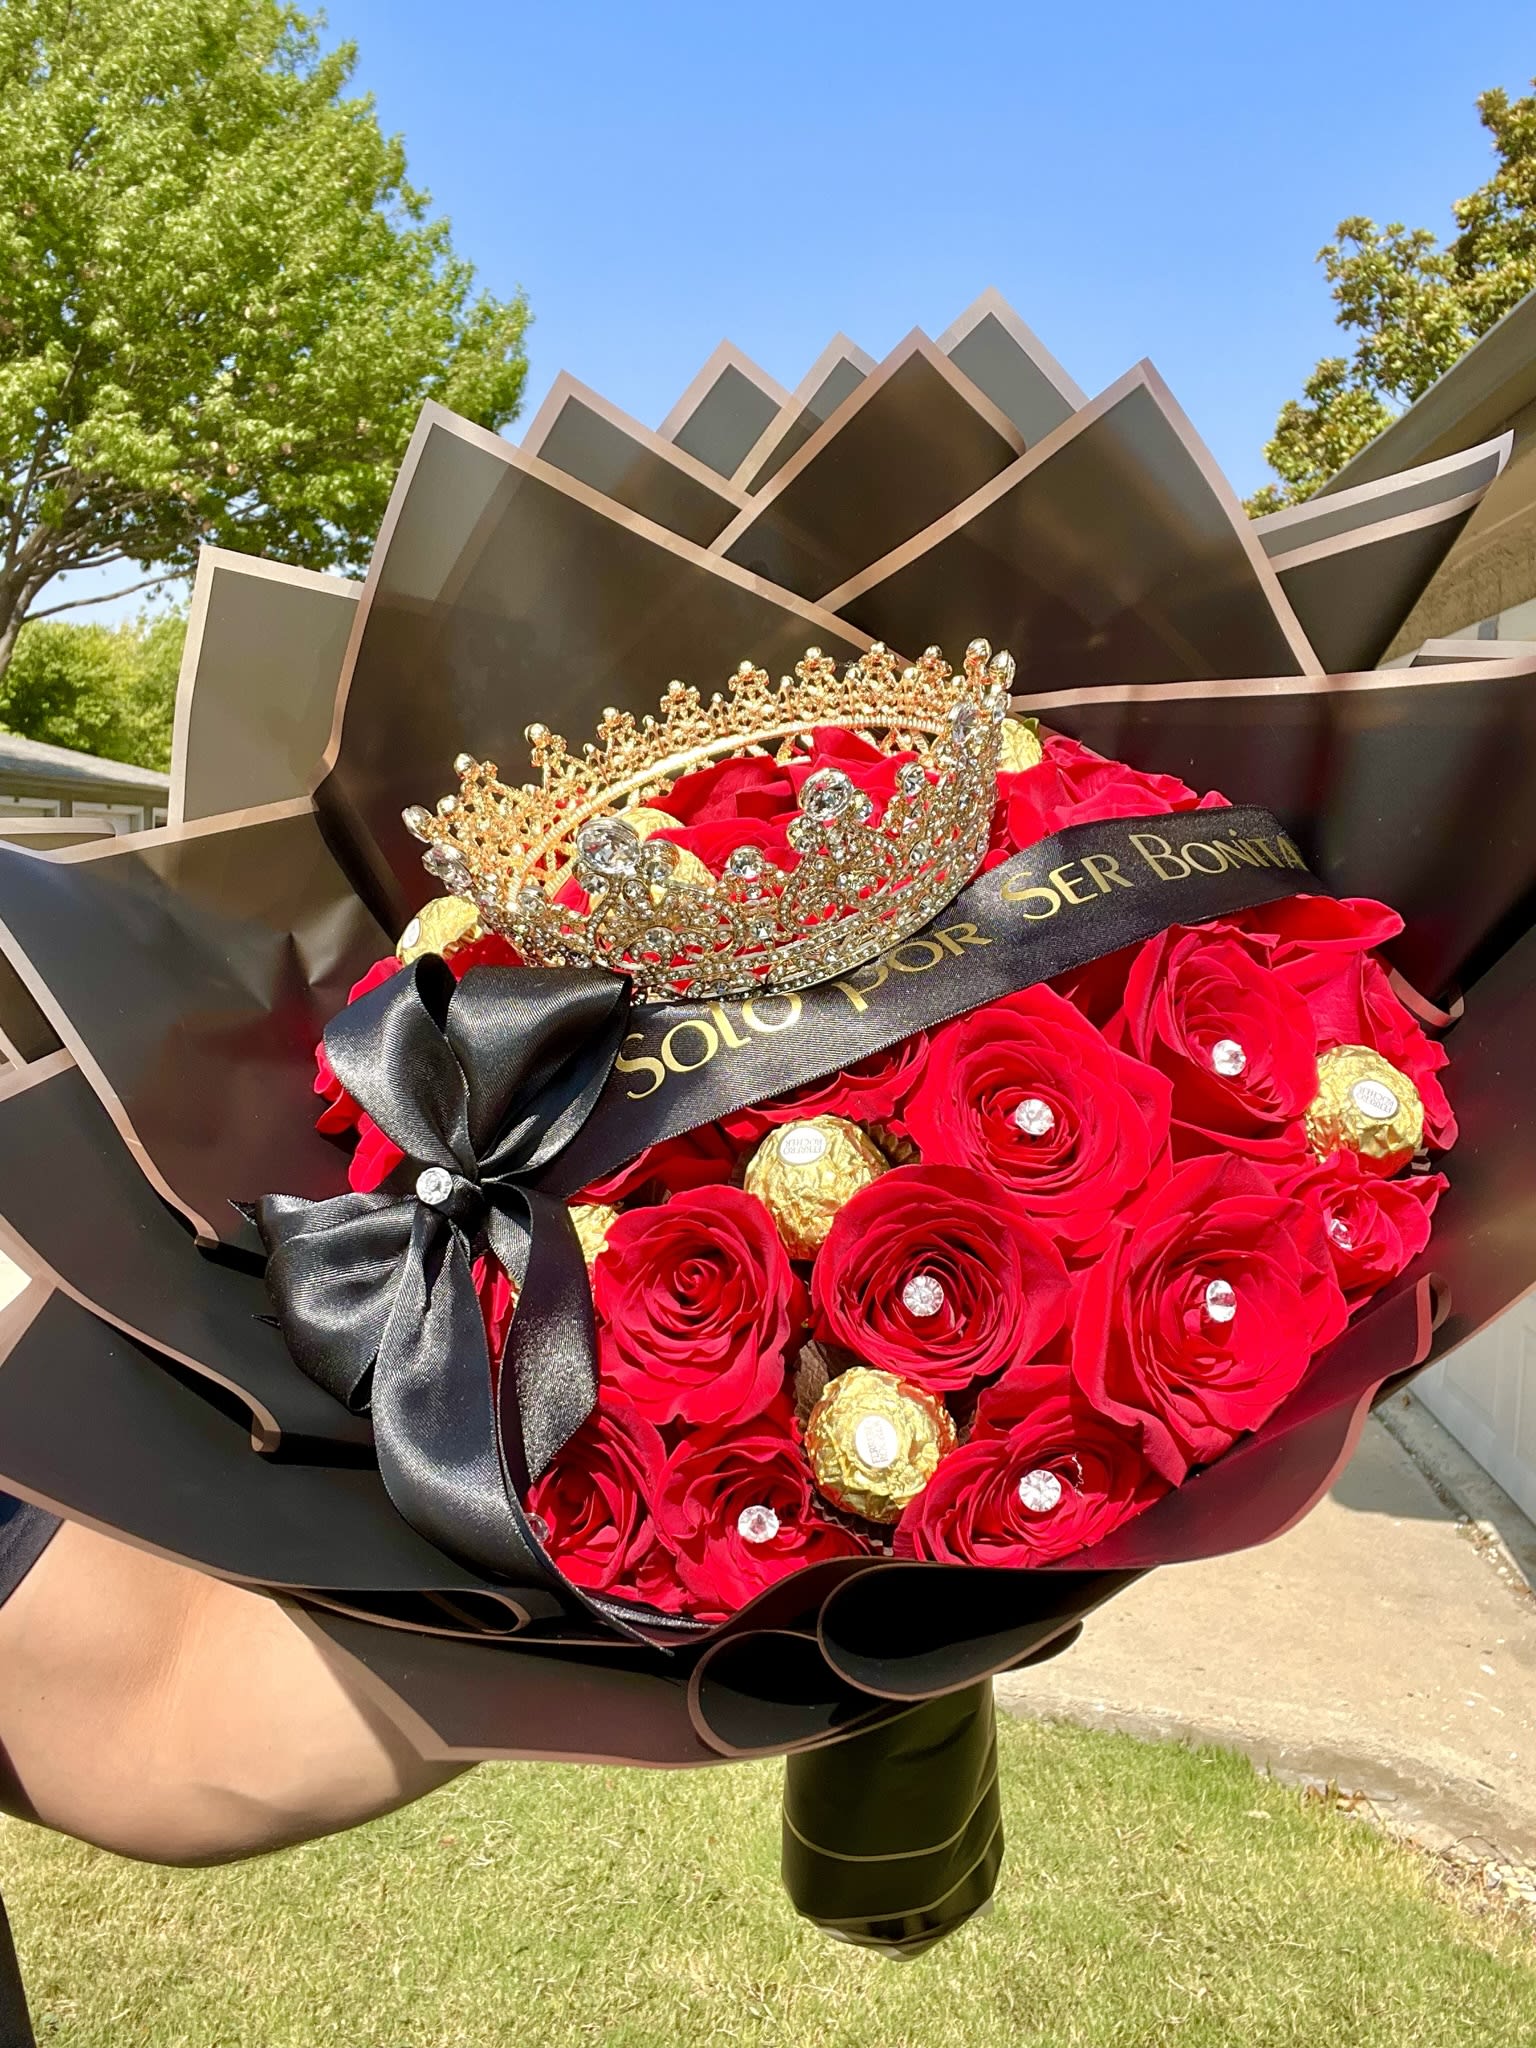 30 Red Roses Black Ribbon Crown in Frisco, TX